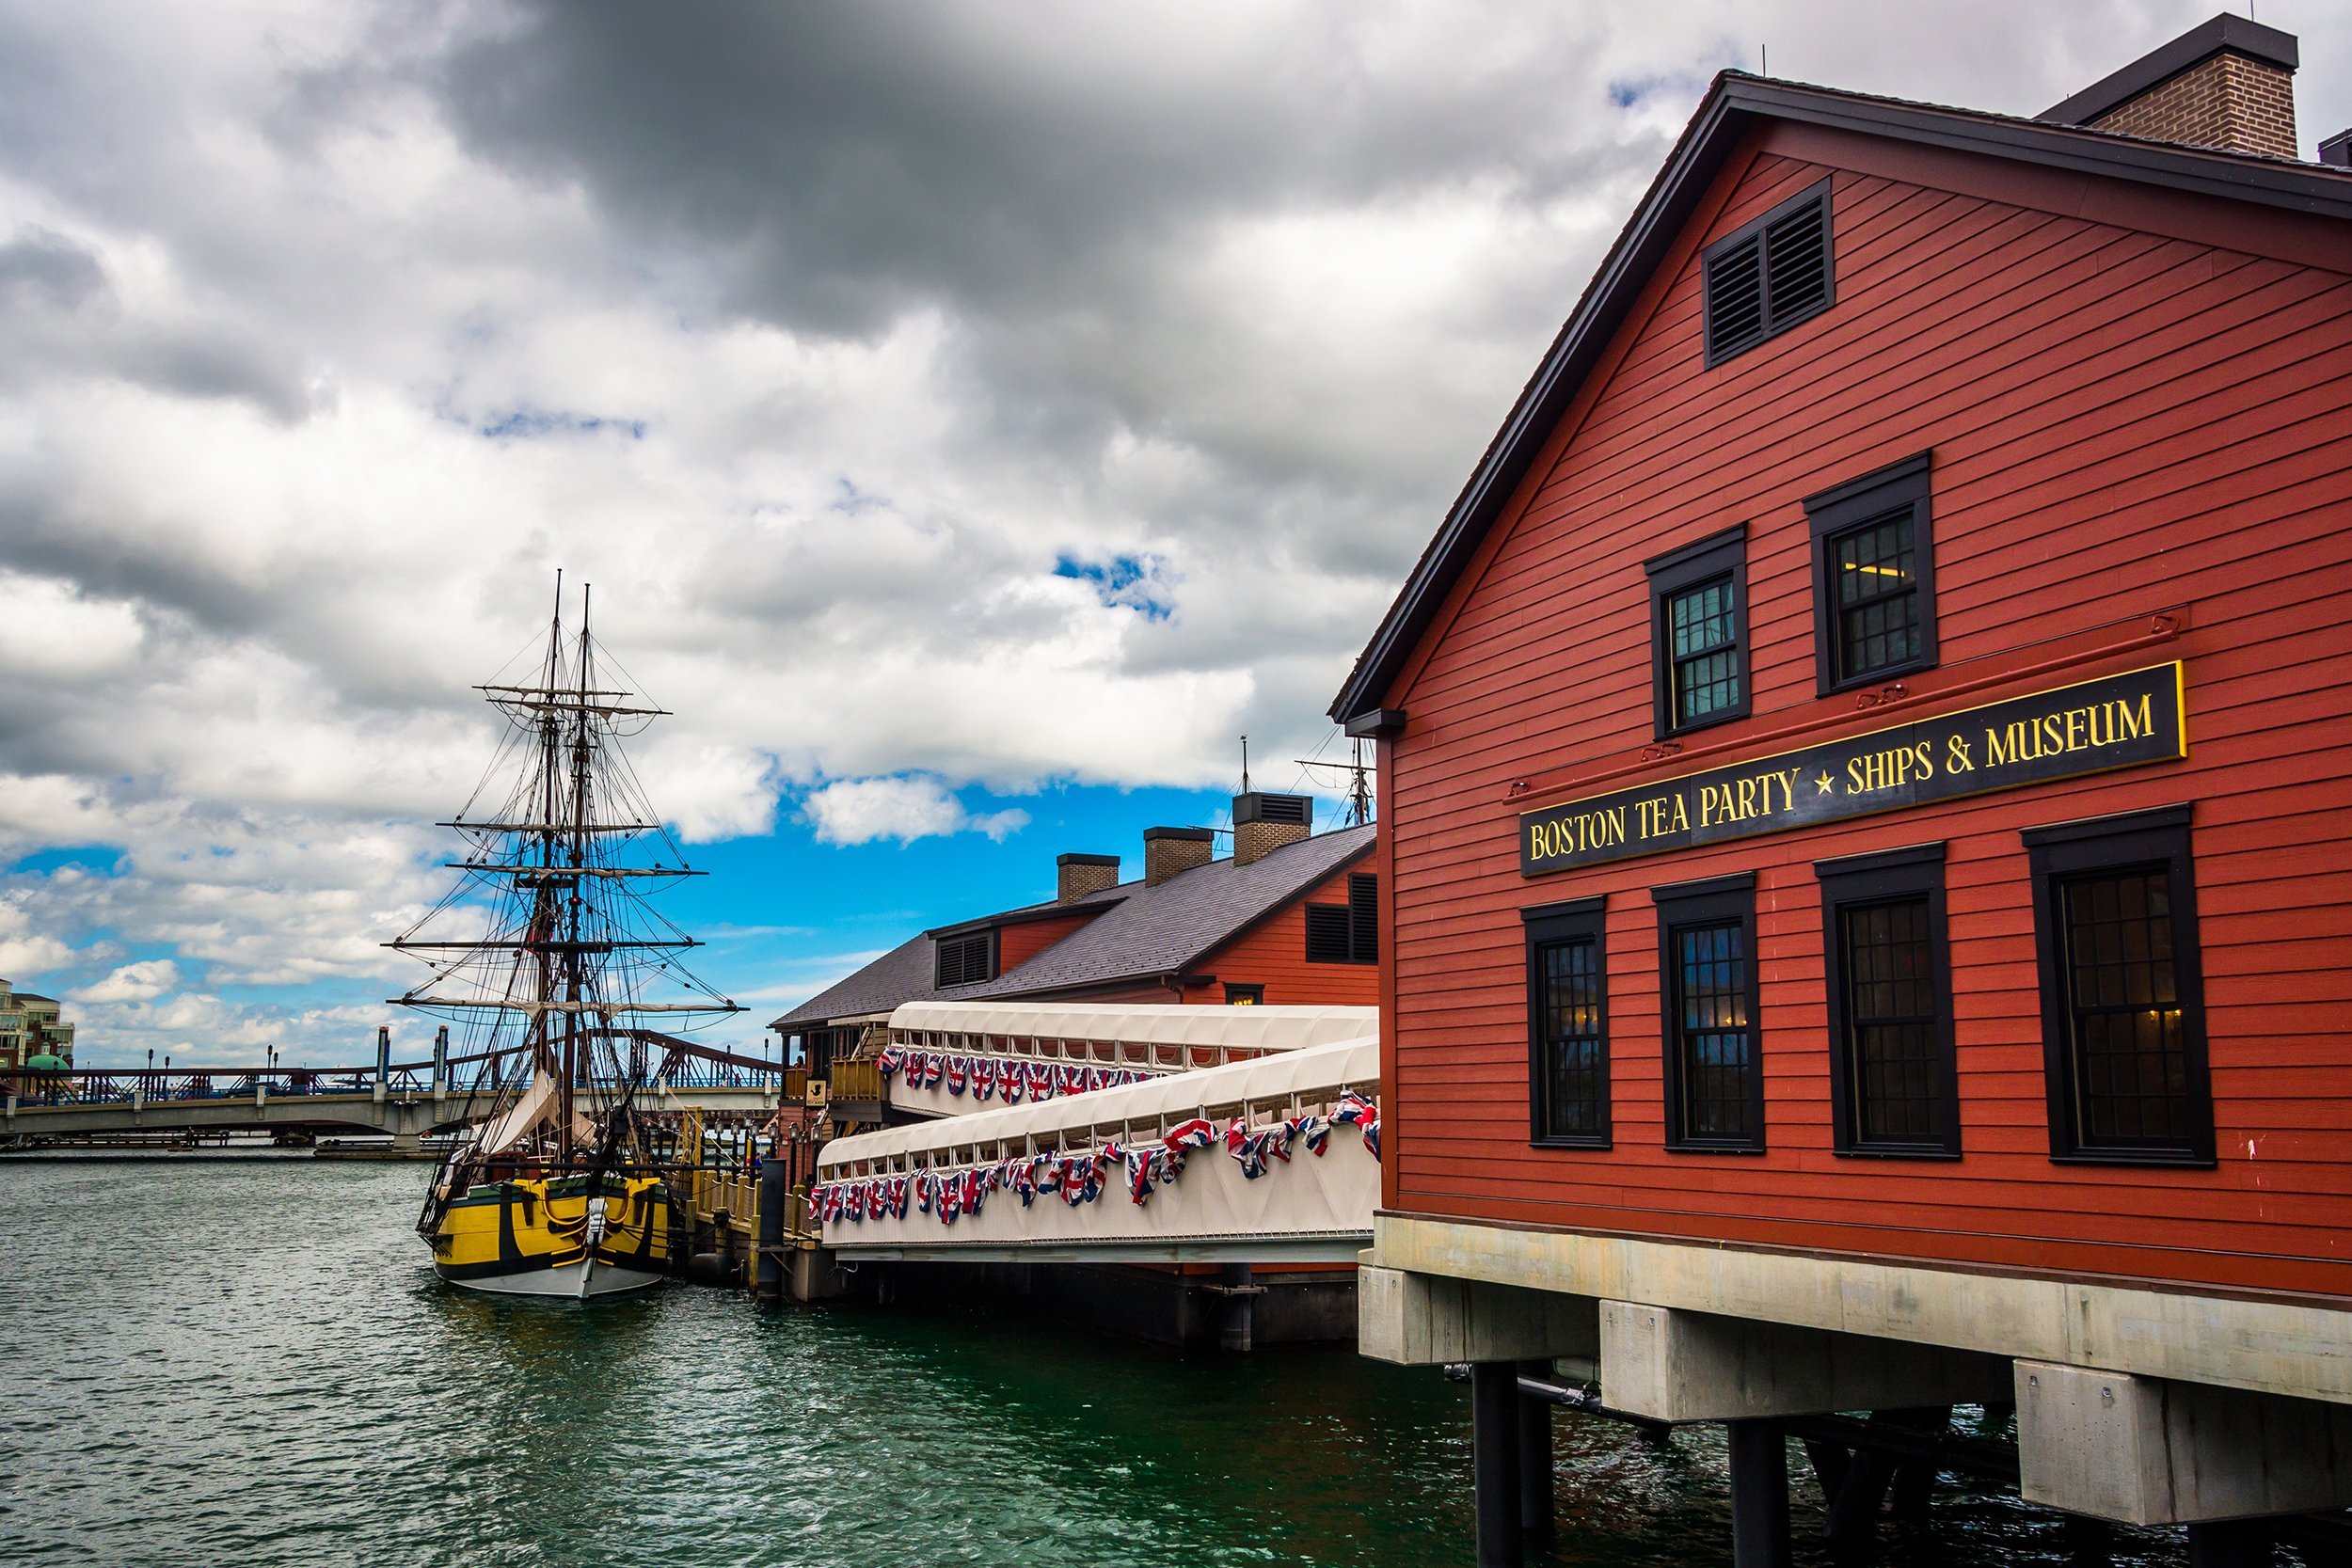 <p><strong>Location:</strong> Boston <br><strong>Era:</strong> 1700s <br><strong>What to do:</strong> Boston is jam-packed with historical sites, but visitors who want to really immerse themselves should check out the <a href="https://www.bostonteapartyship.com/museum">Boston Tea Party Ships & Museum</a>, where they can rub elbows with costumed colonial interpreters and, of course, dump some "tea" overboard. <br><strong>Cost:</strong> Starting at $32 adults; $24 for ages 5 to 12</p><p><b>Related:</b> <a href="https://blog.cheapism.com/new-england-trivia/">Fun Facts About New England</a></p>